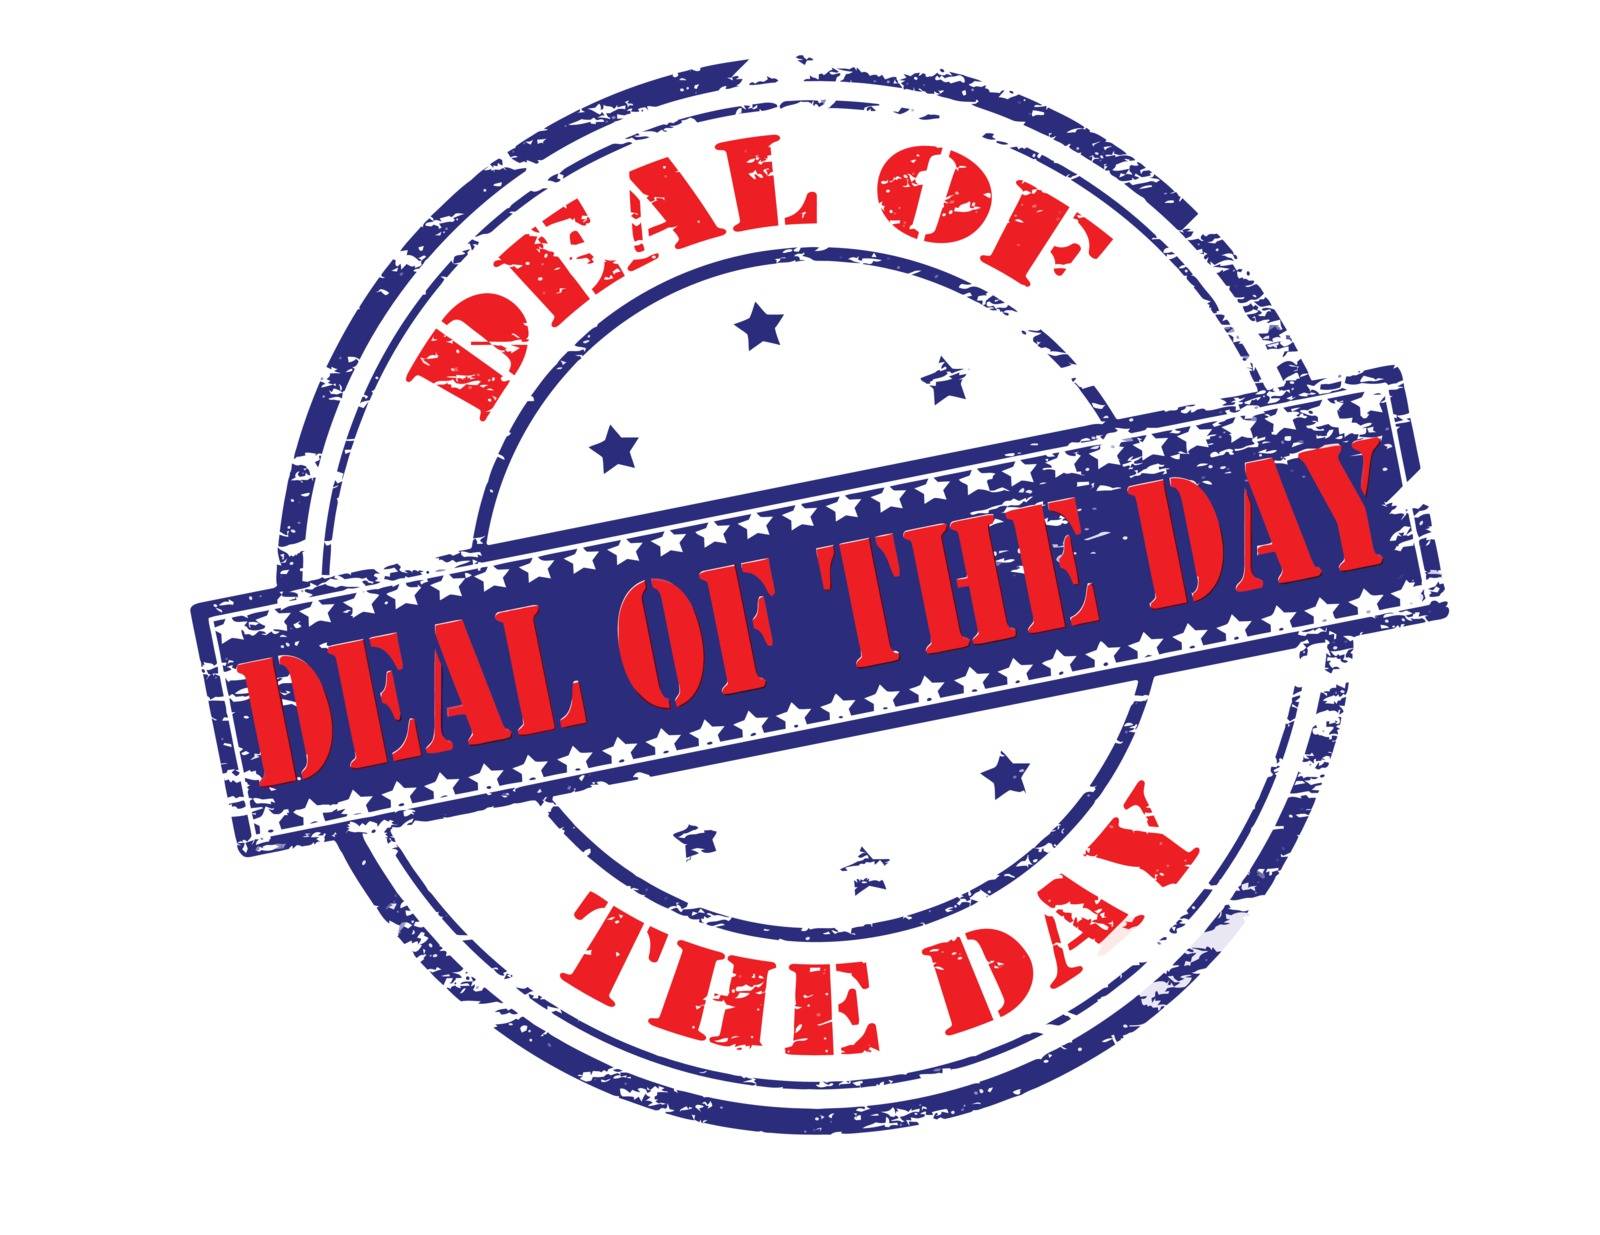 Deal of the day by carmenbobo